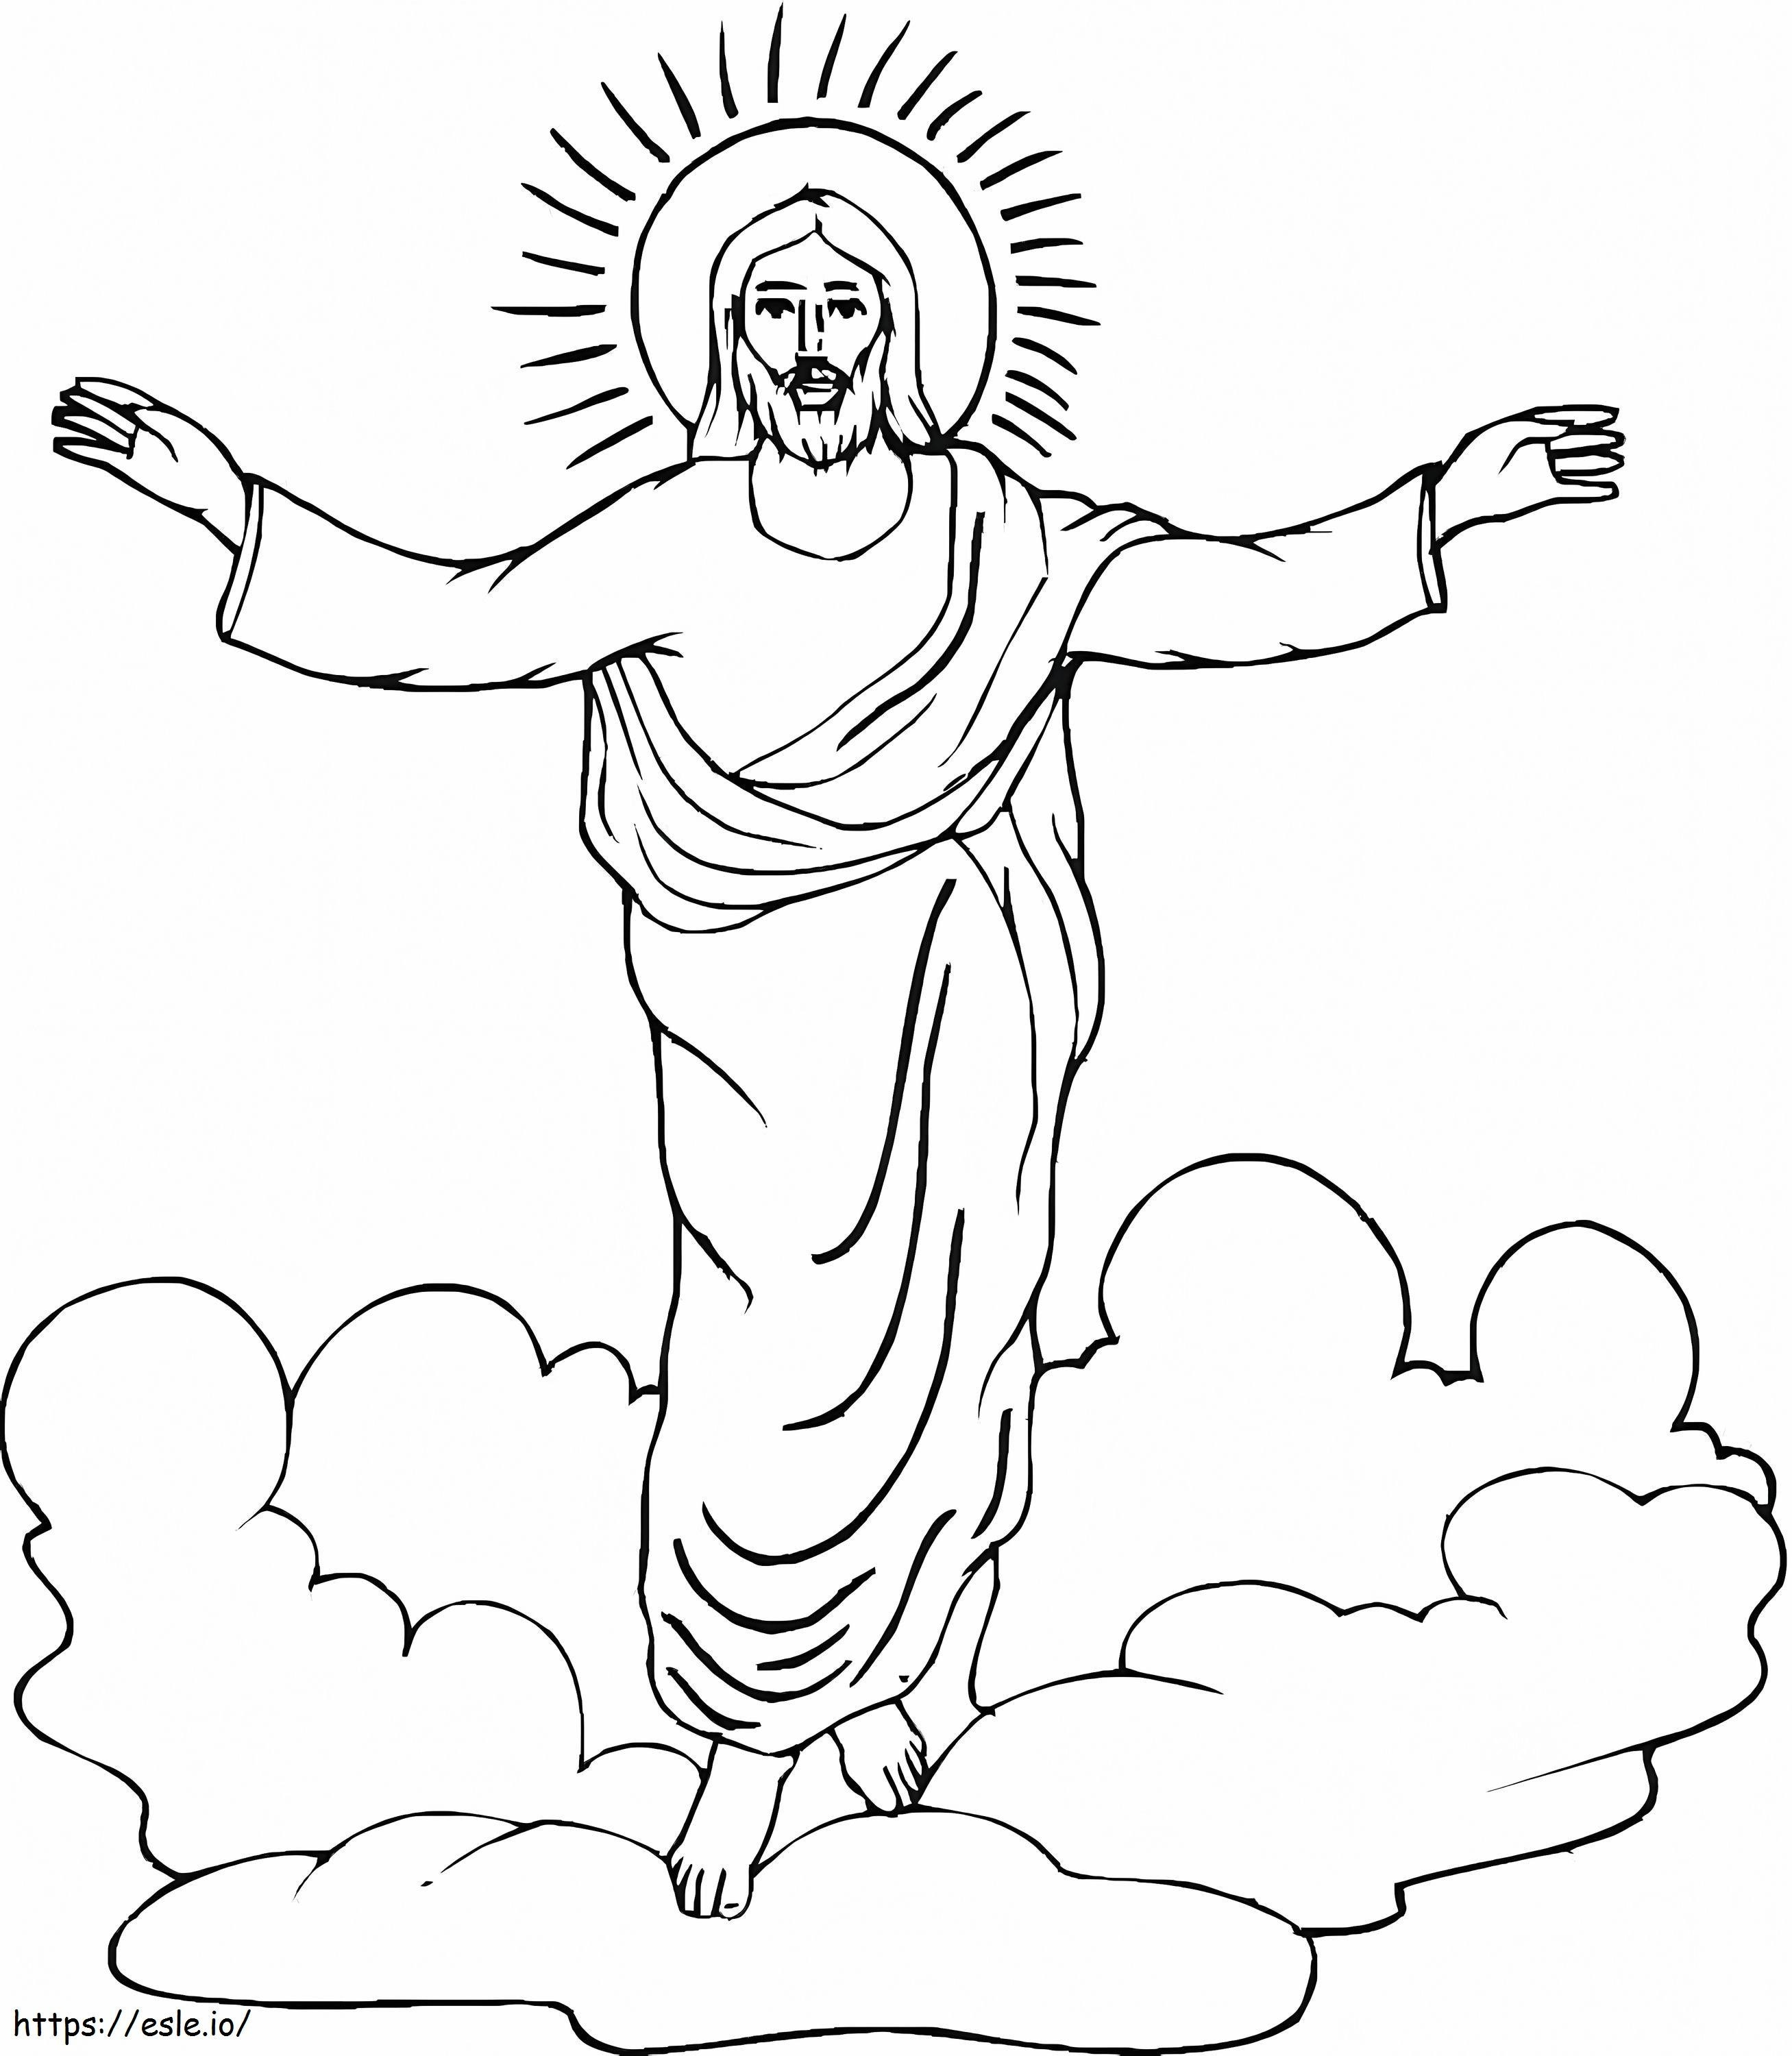 The Resurrection Of Jesus coloring page